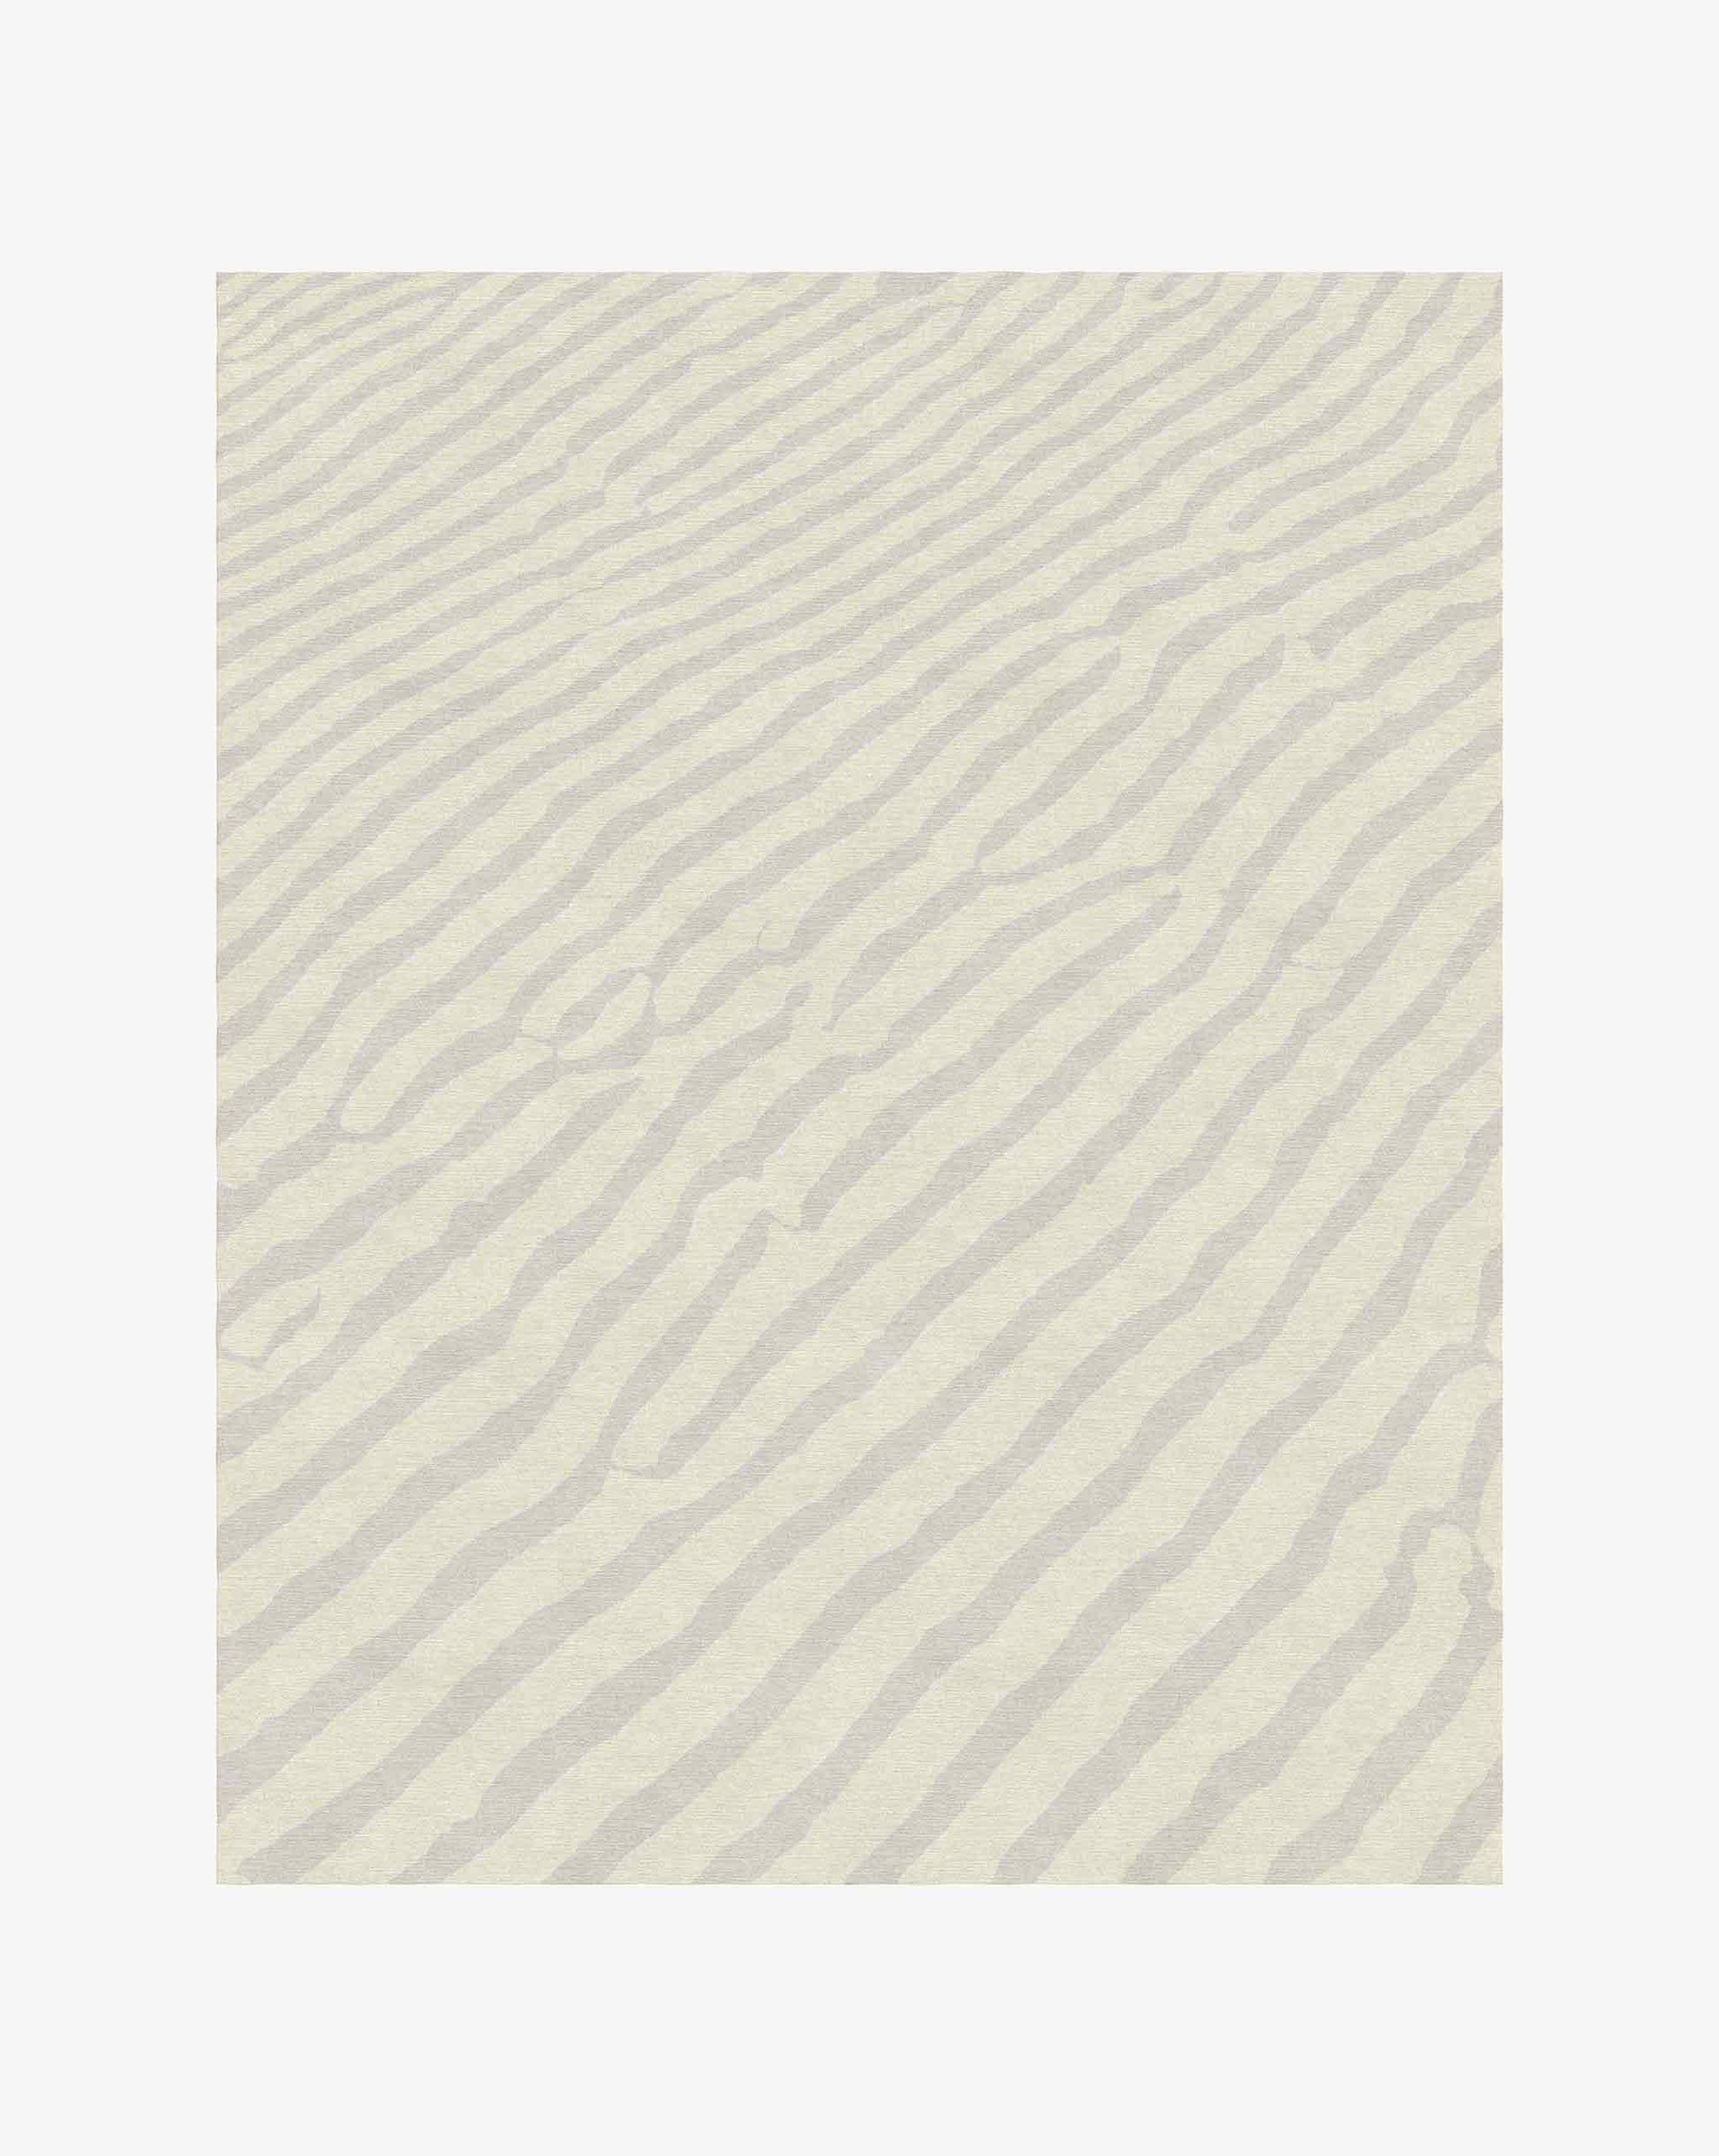 Made of soft merino wool, Eskayel’s Sand Lines rug in Sand is a colorway of beige and grey.